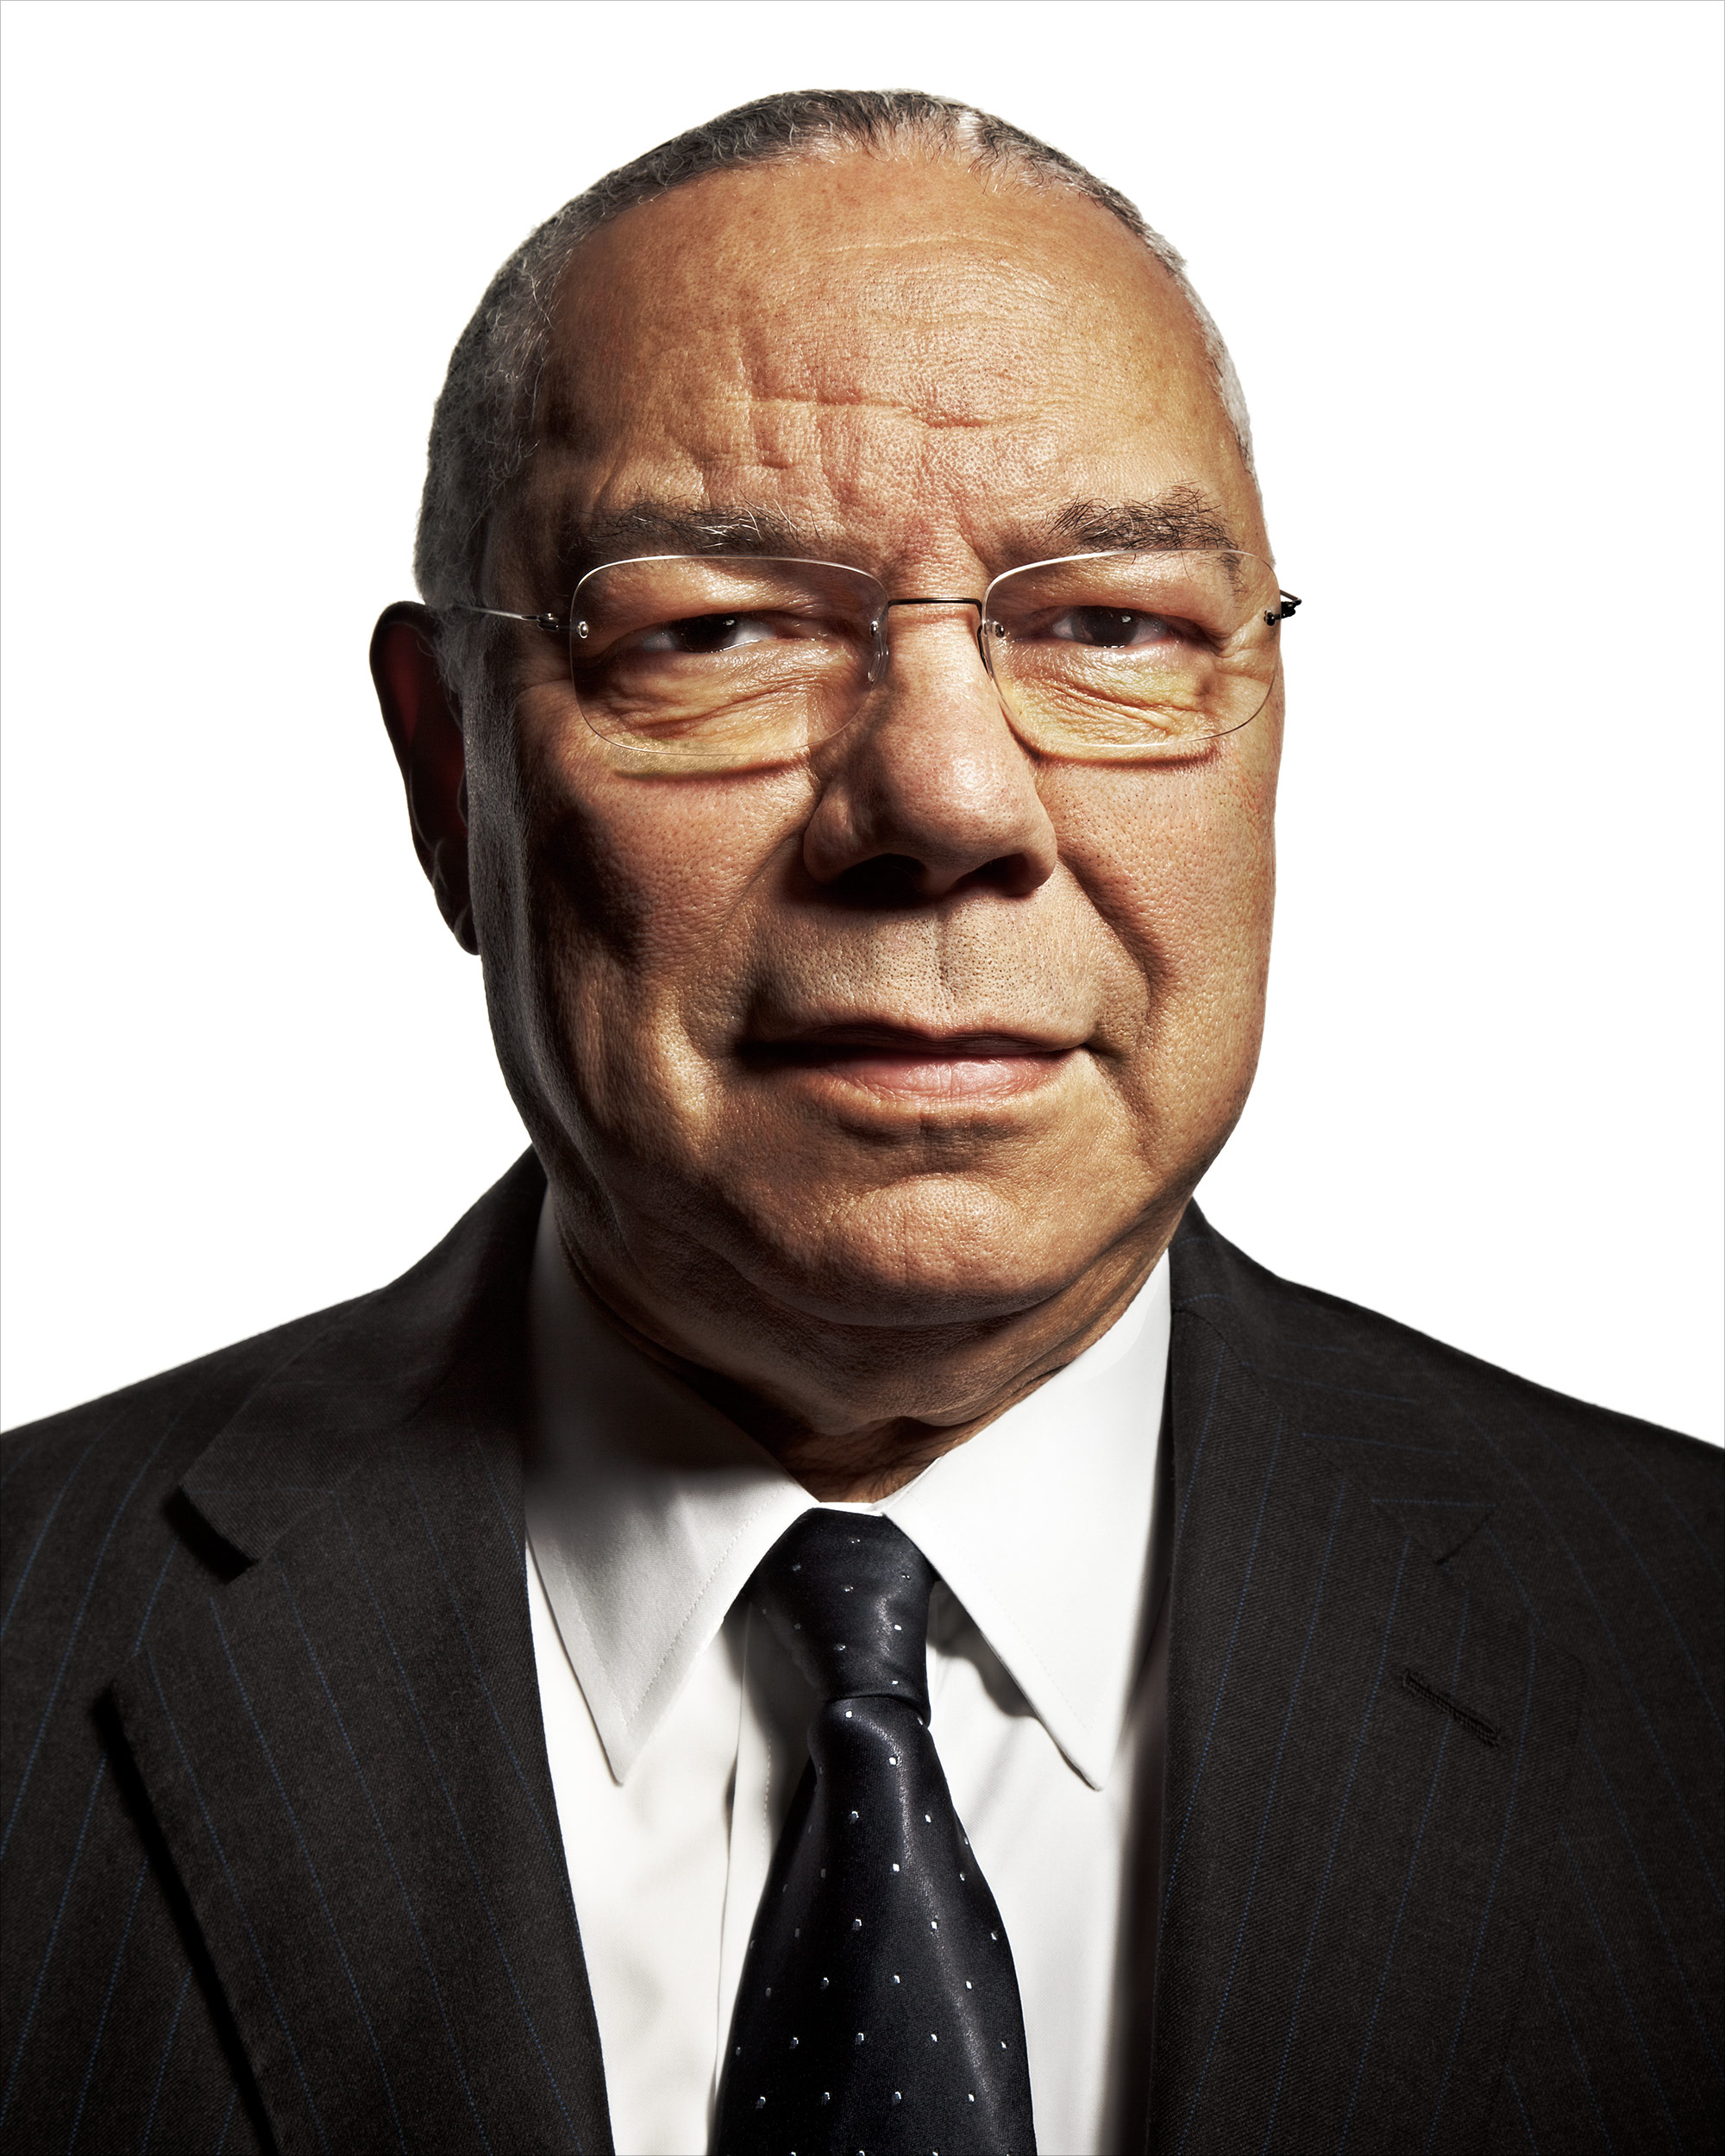 General Colin Powell, former Secretary of State